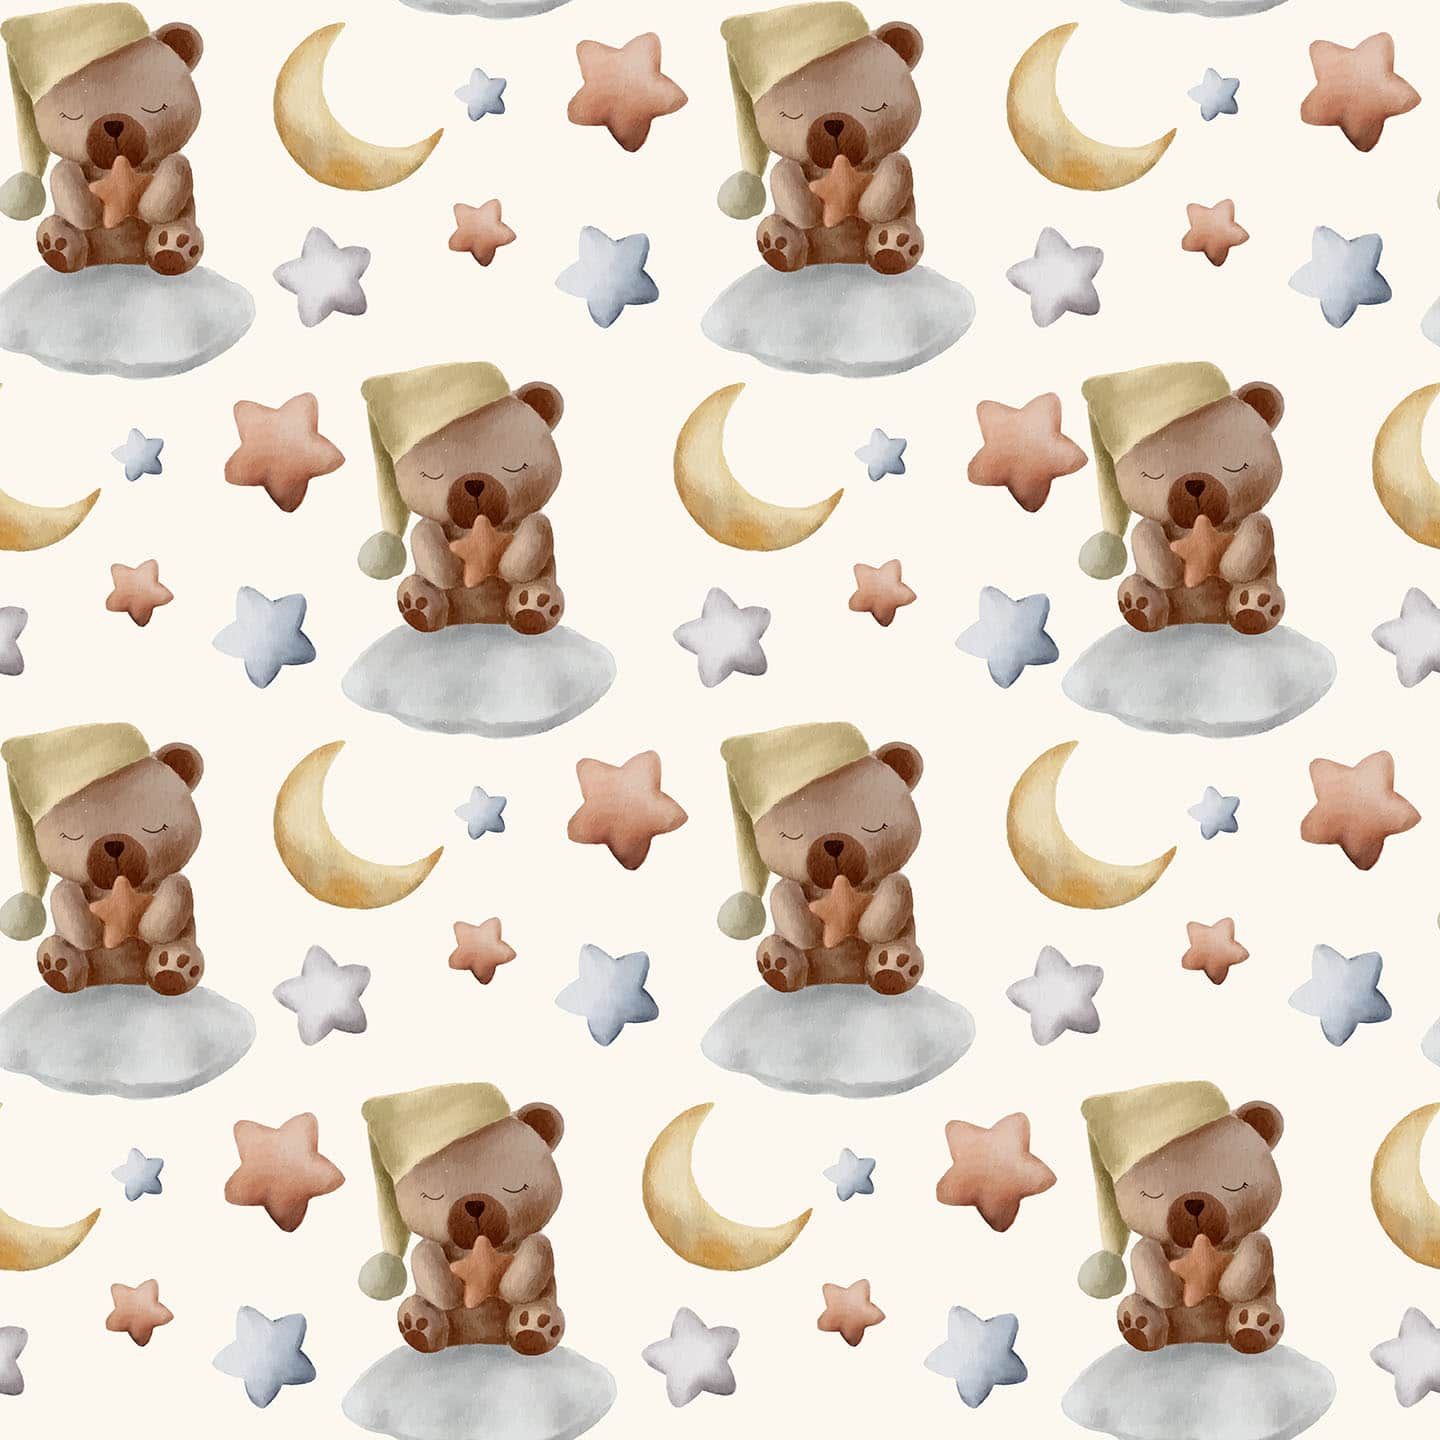 Aesthetic Teddy Bear Wallpaper And Stick Or Non Pasted